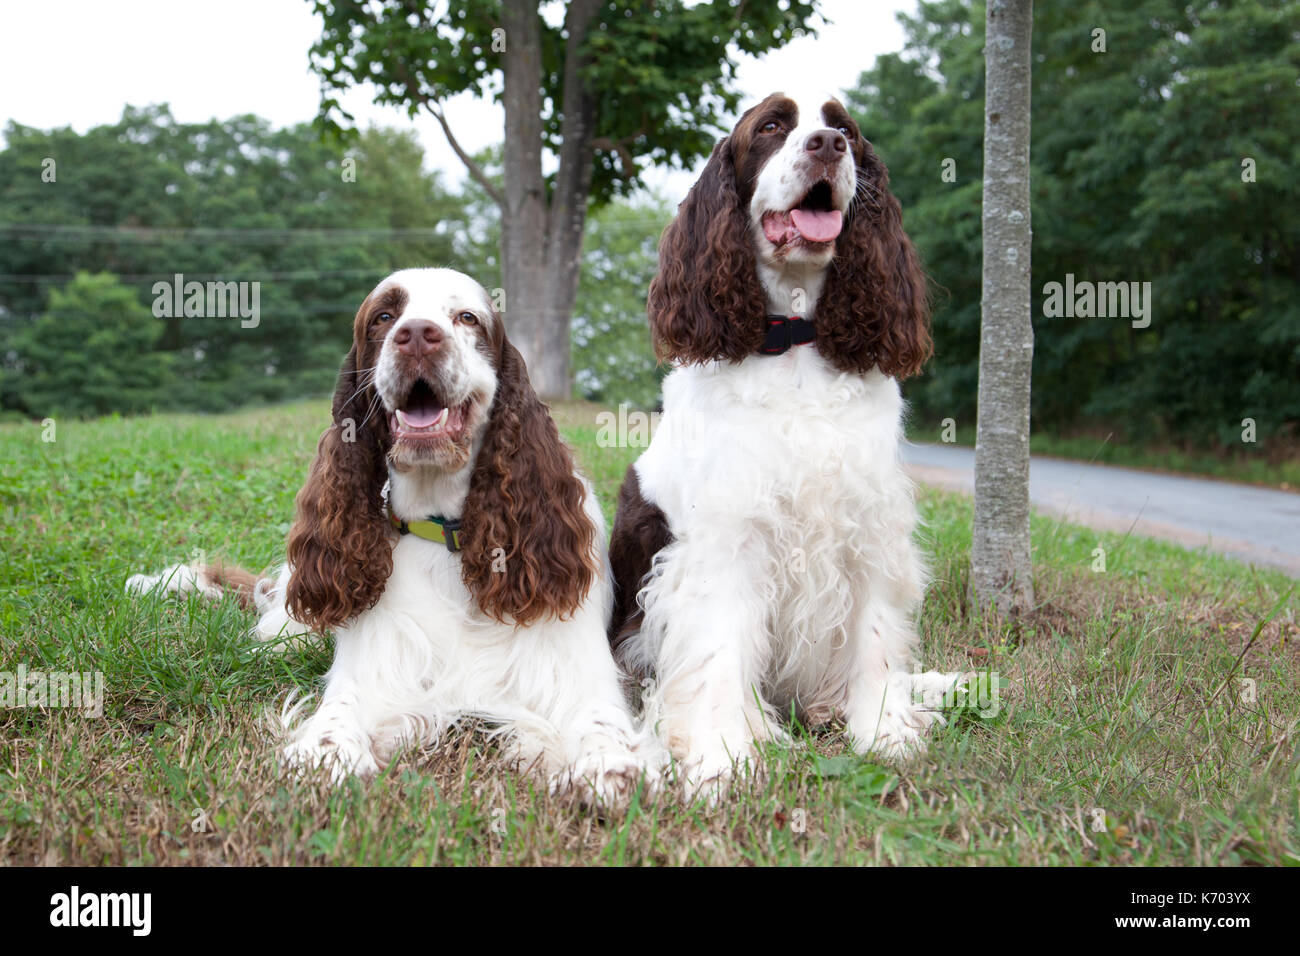 two brown and white spaniel dogs sit outside together in the grass Stock Photo